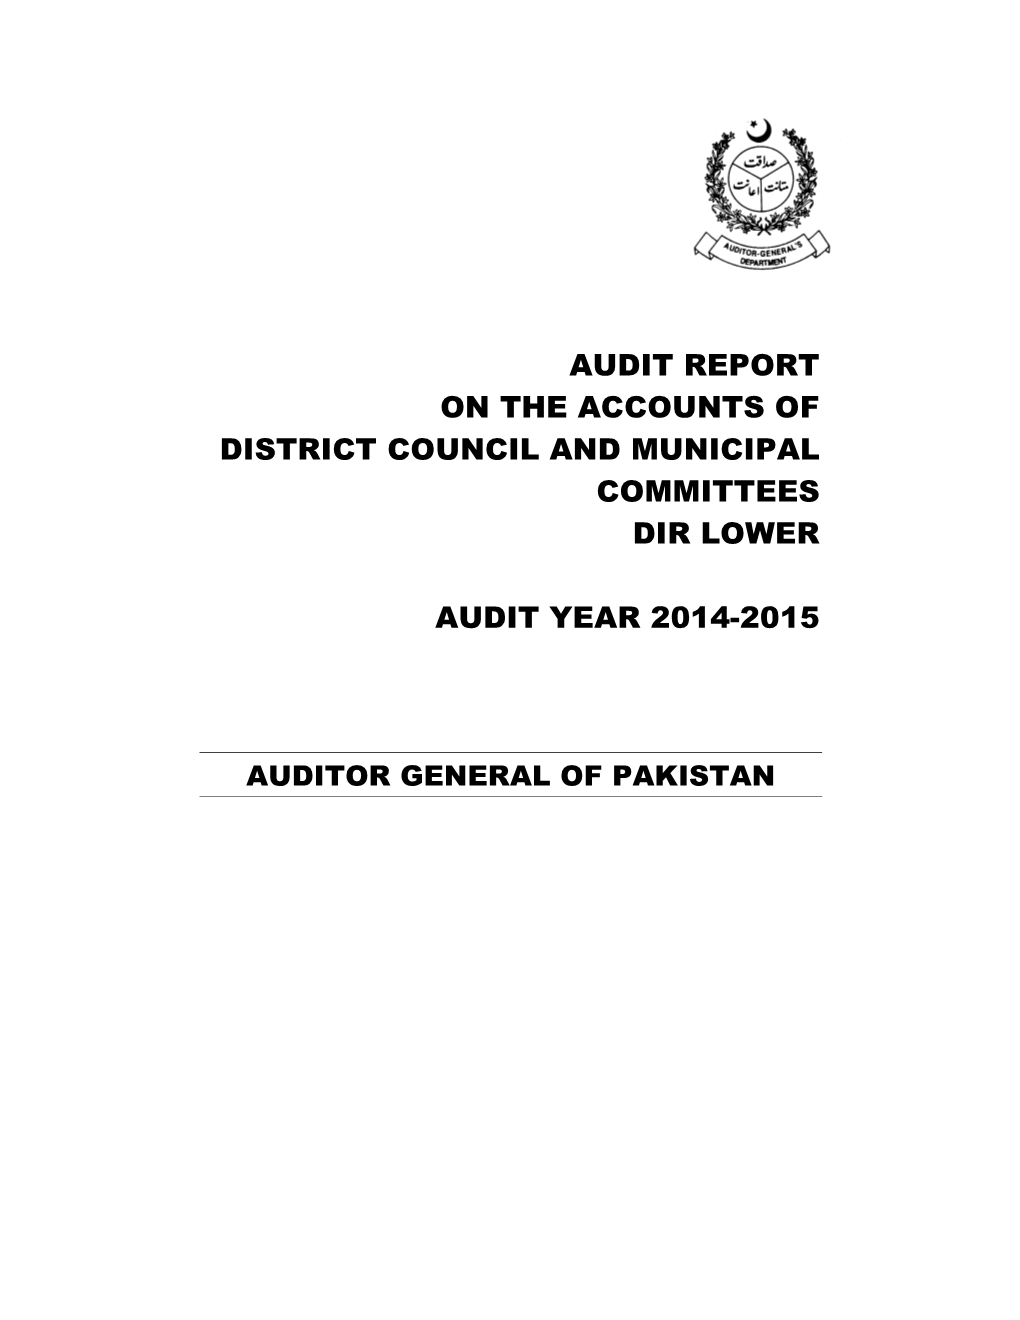 Audit Report on the Accounts of District Council and Municipal Committees Dir Lower